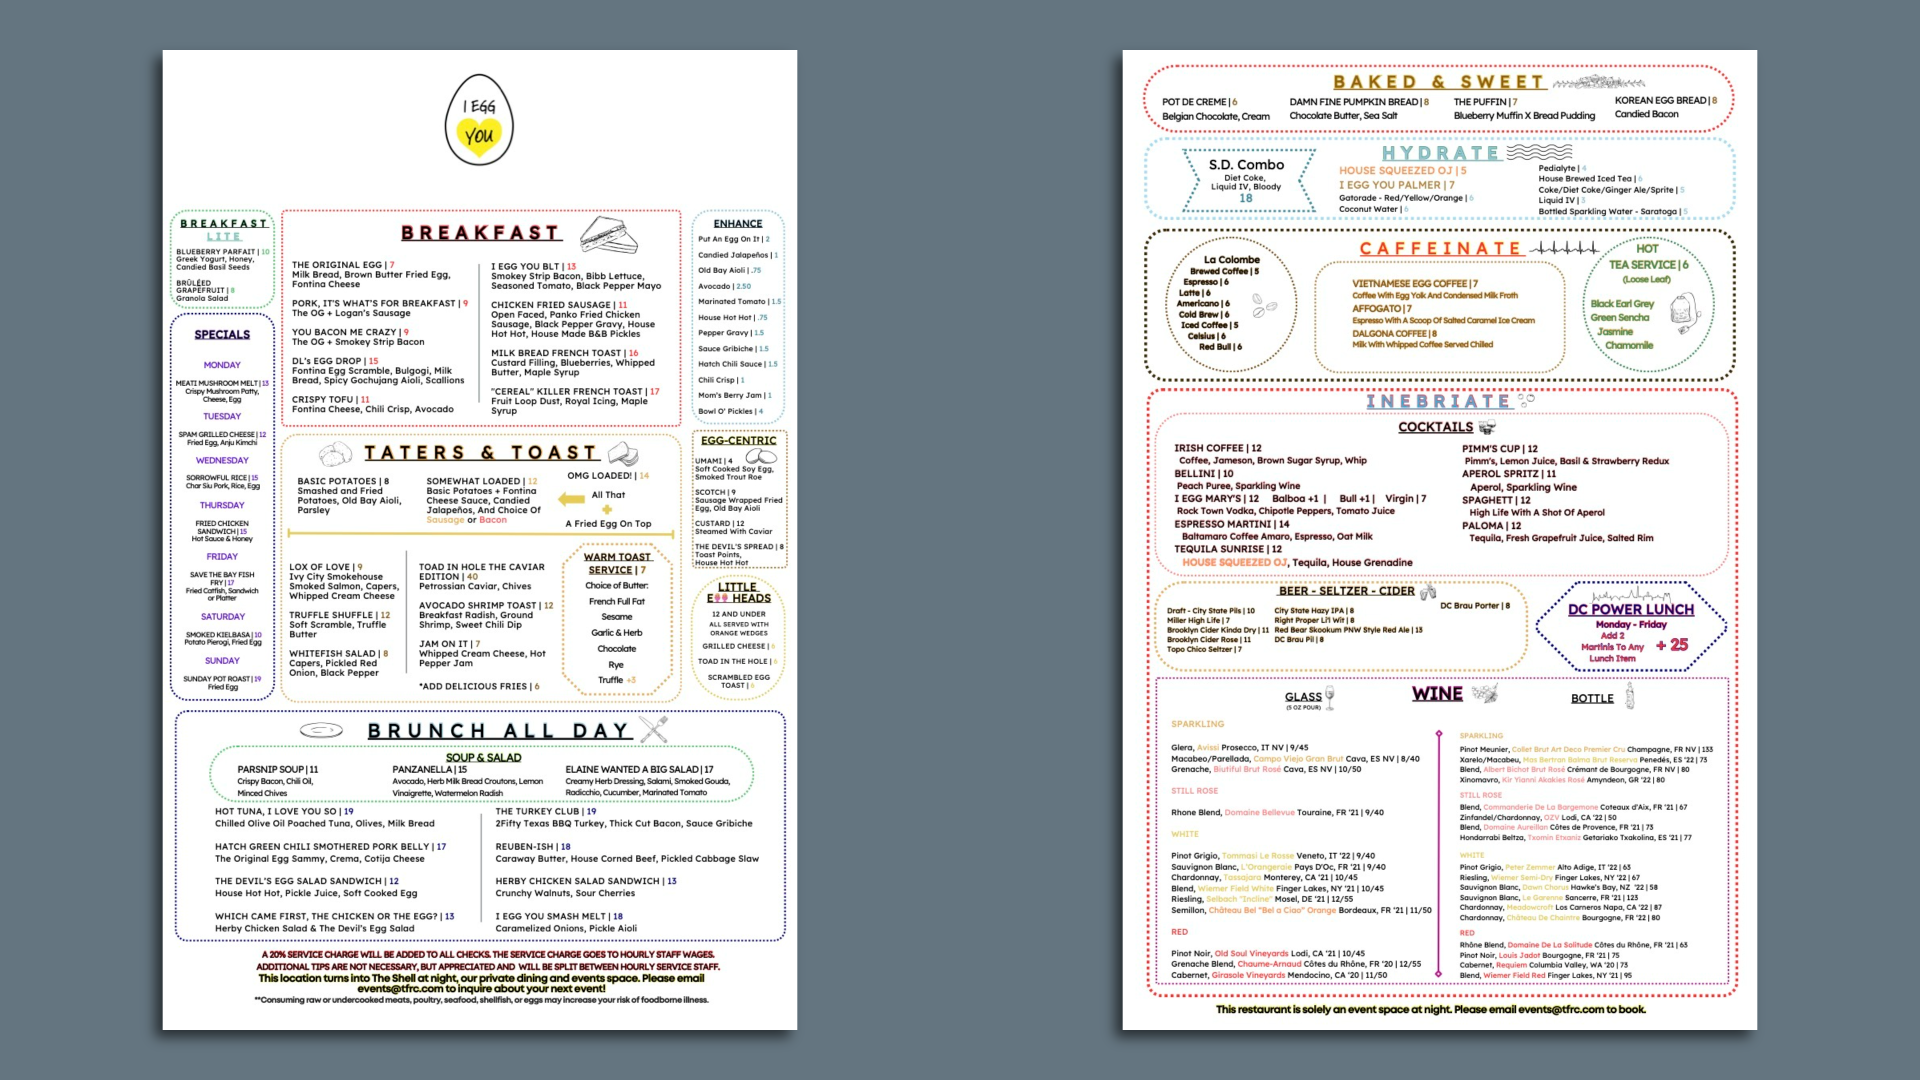 Two I Egg You menus side by side.